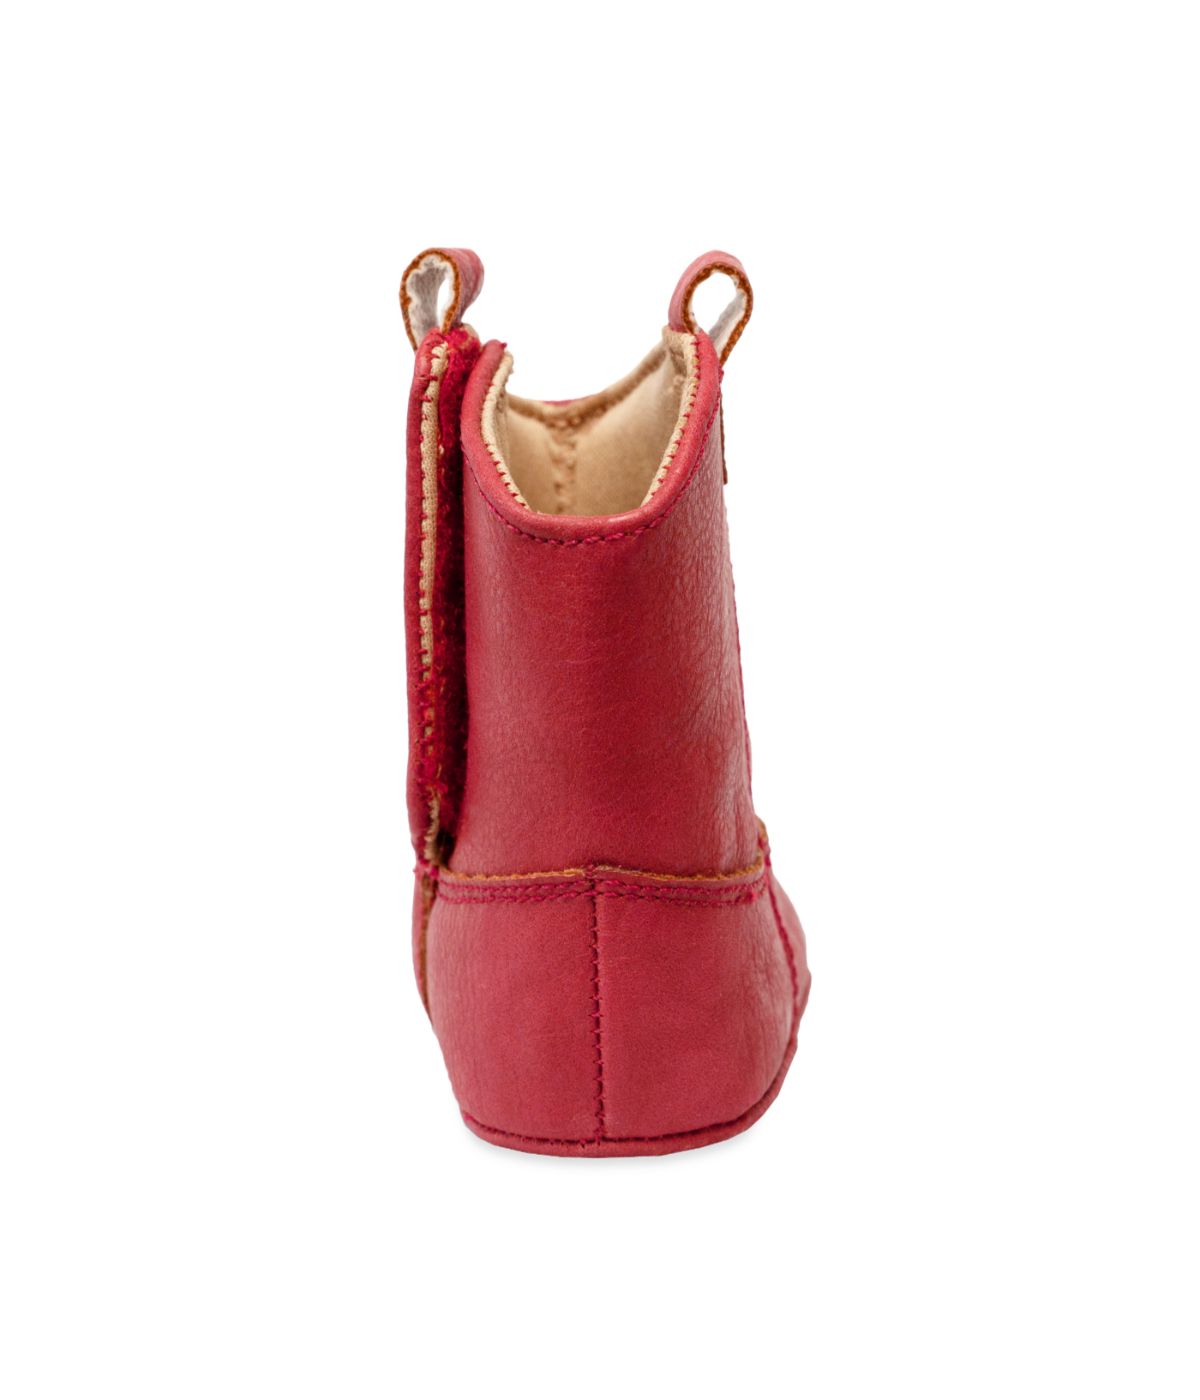 Infant Red Western Boot